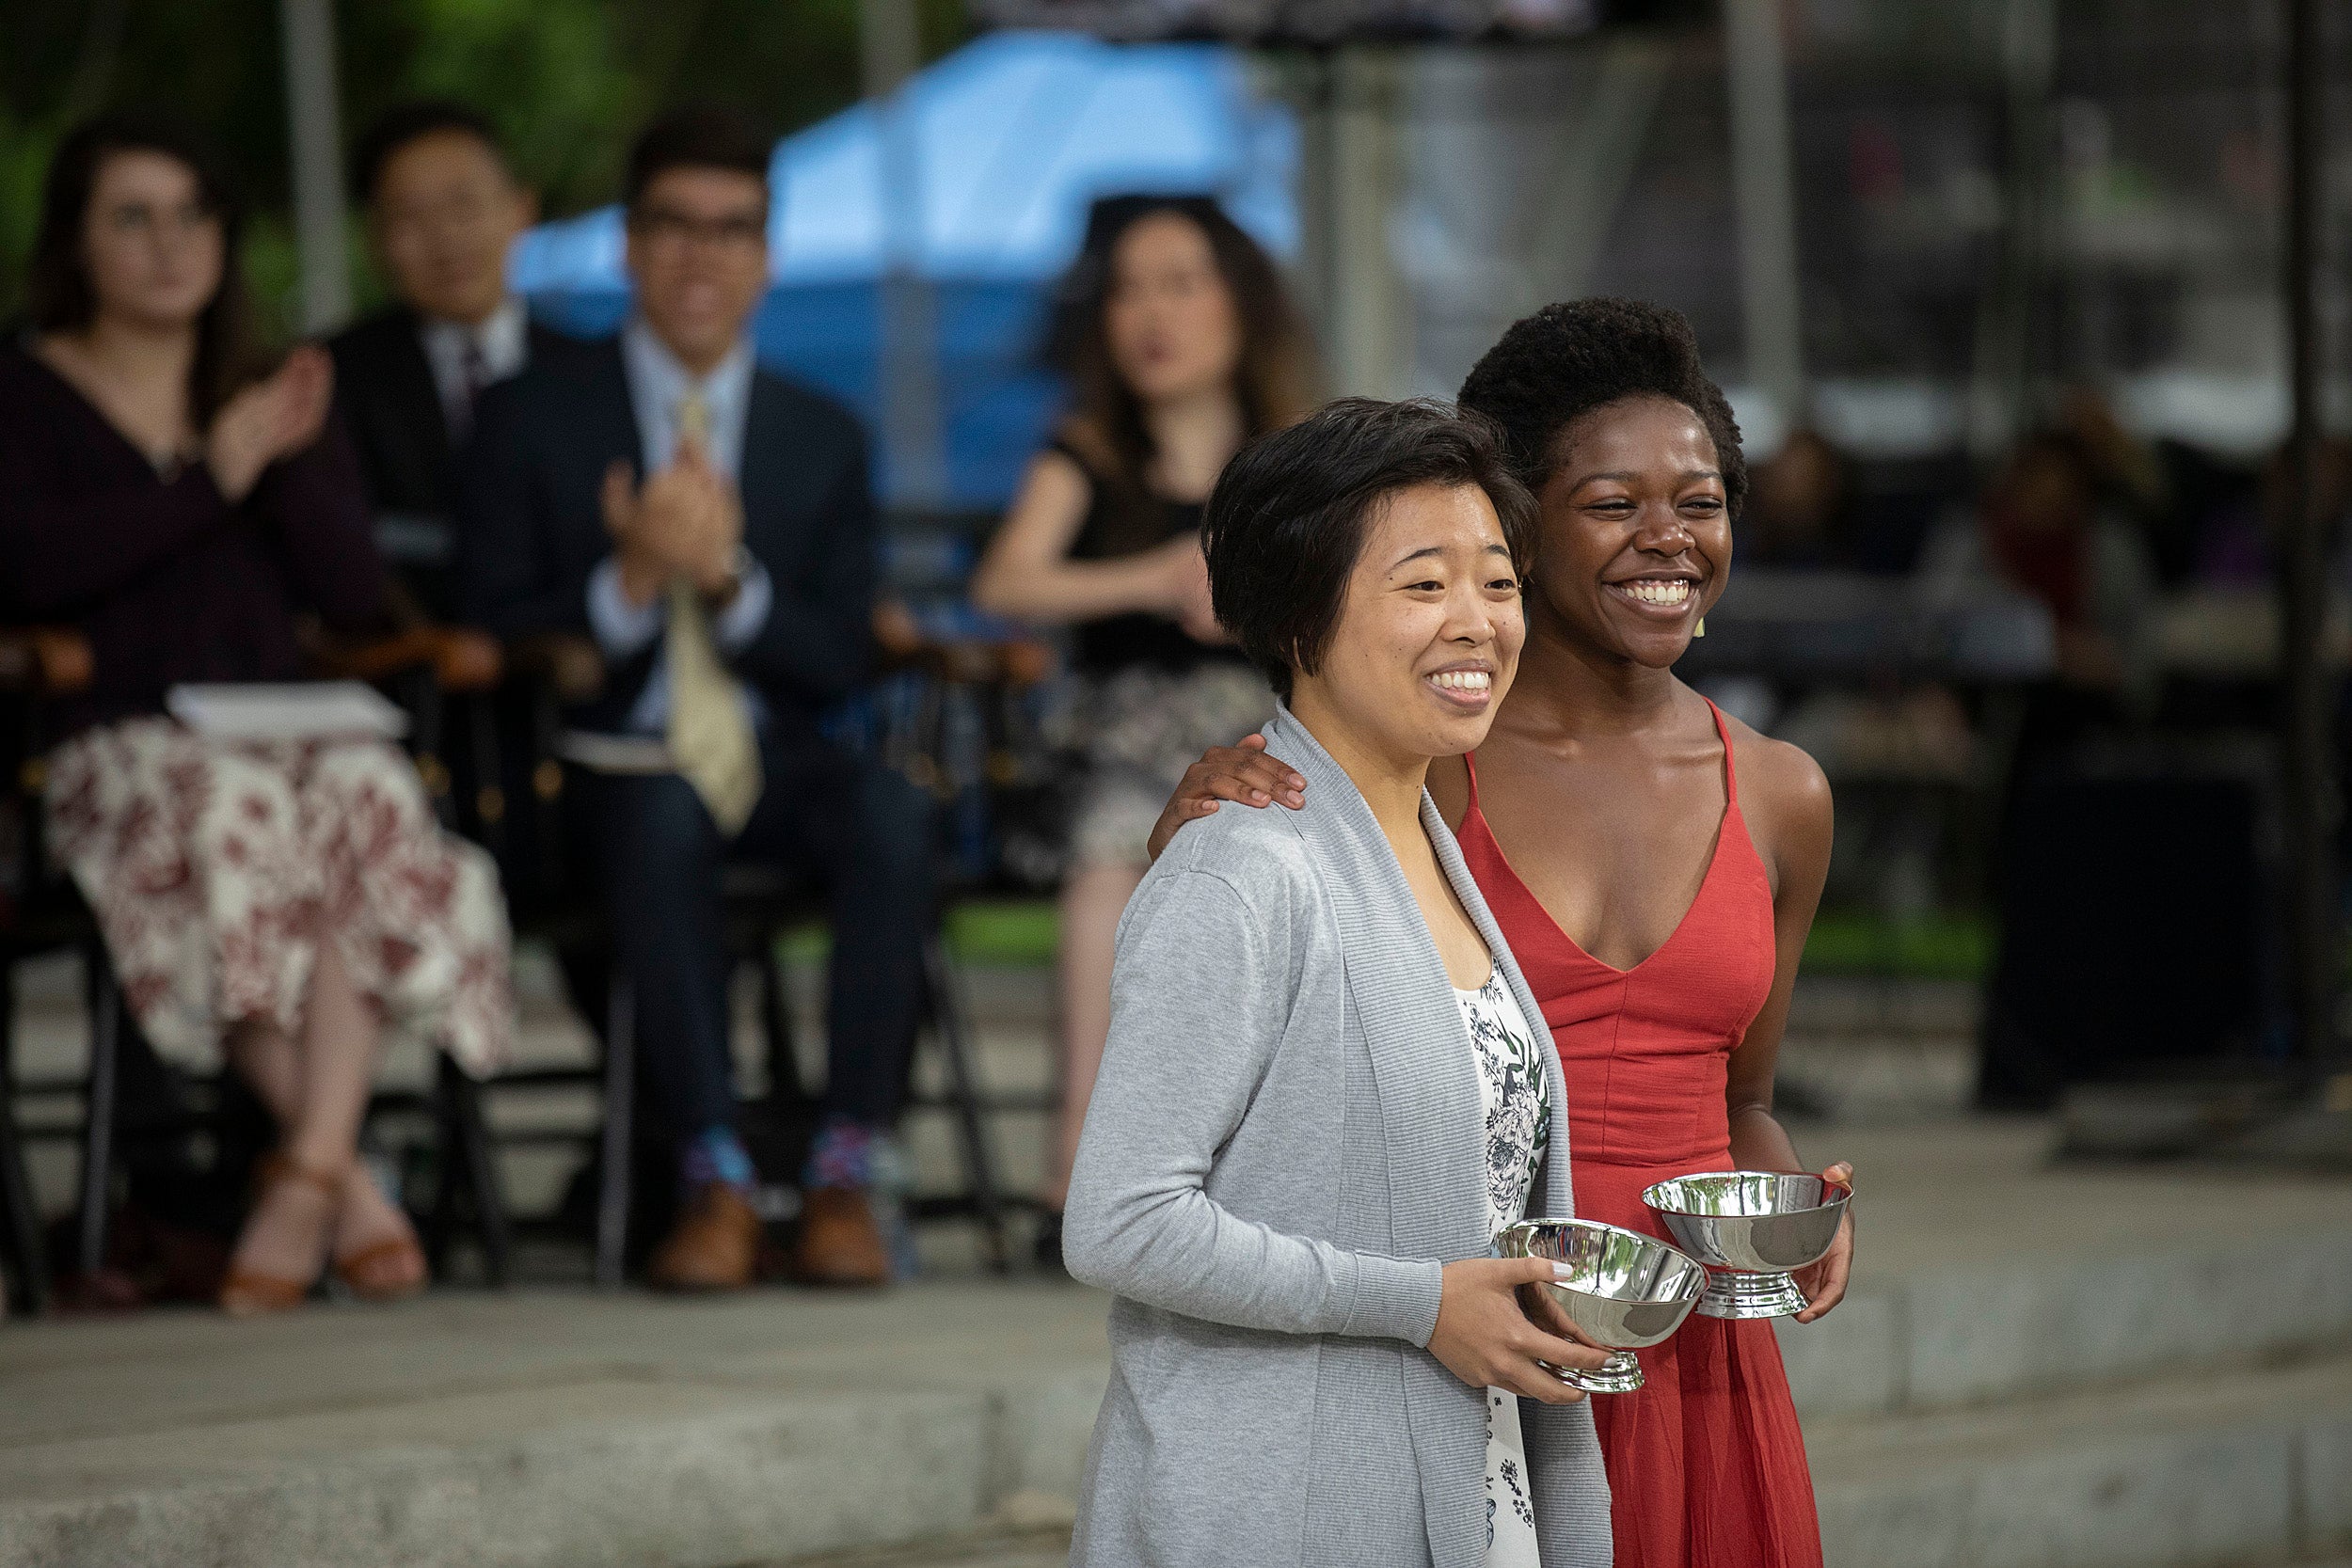 Sally Chen (left) and Jessica Ekeya pose with their awards